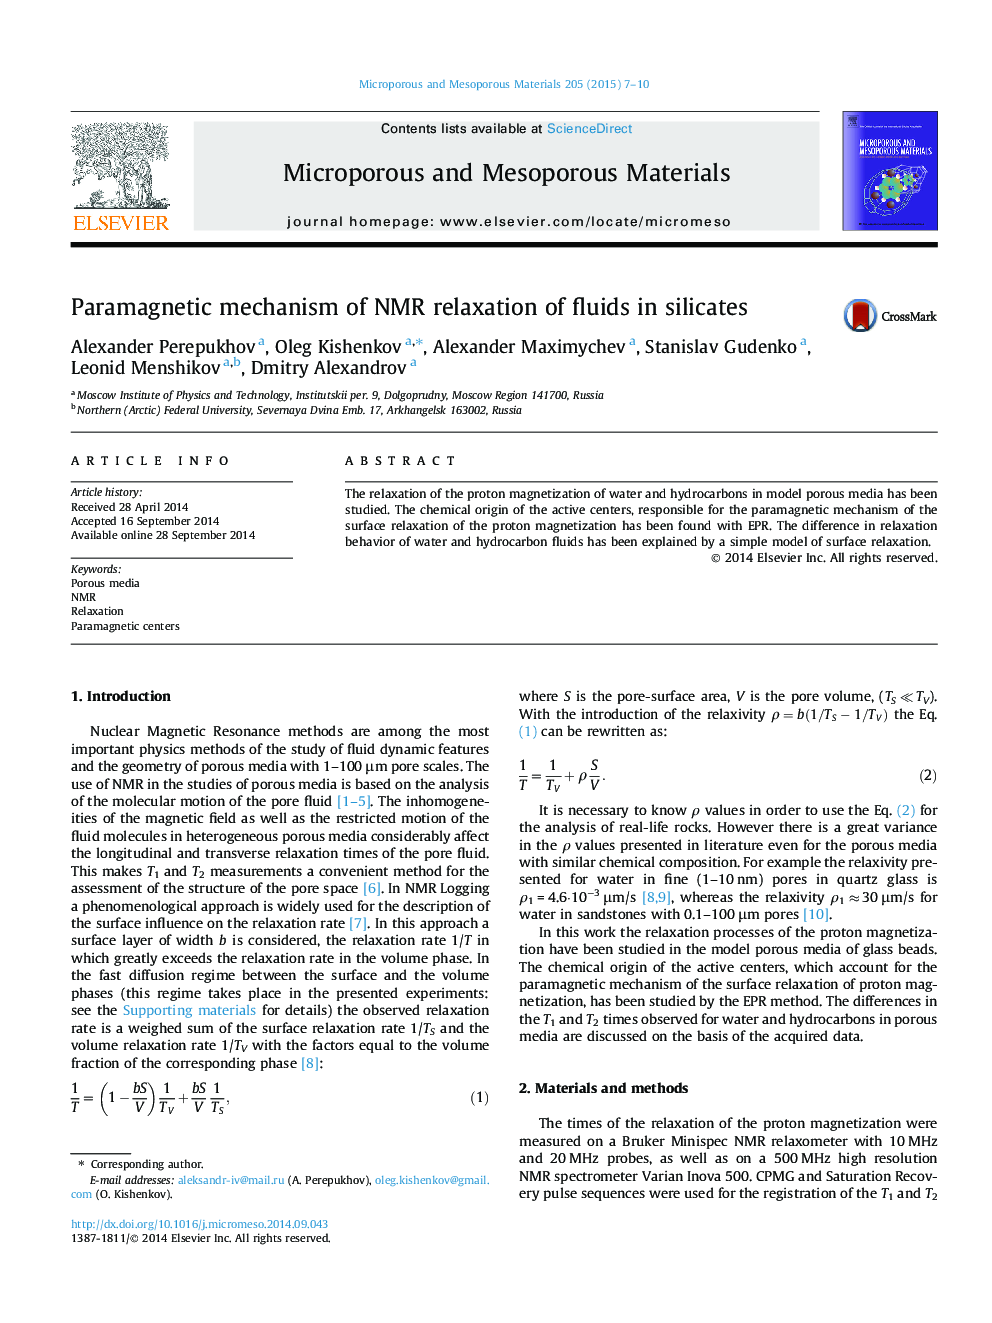 Paramagnetic mechanism of NMR relaxation of fluids in silicates